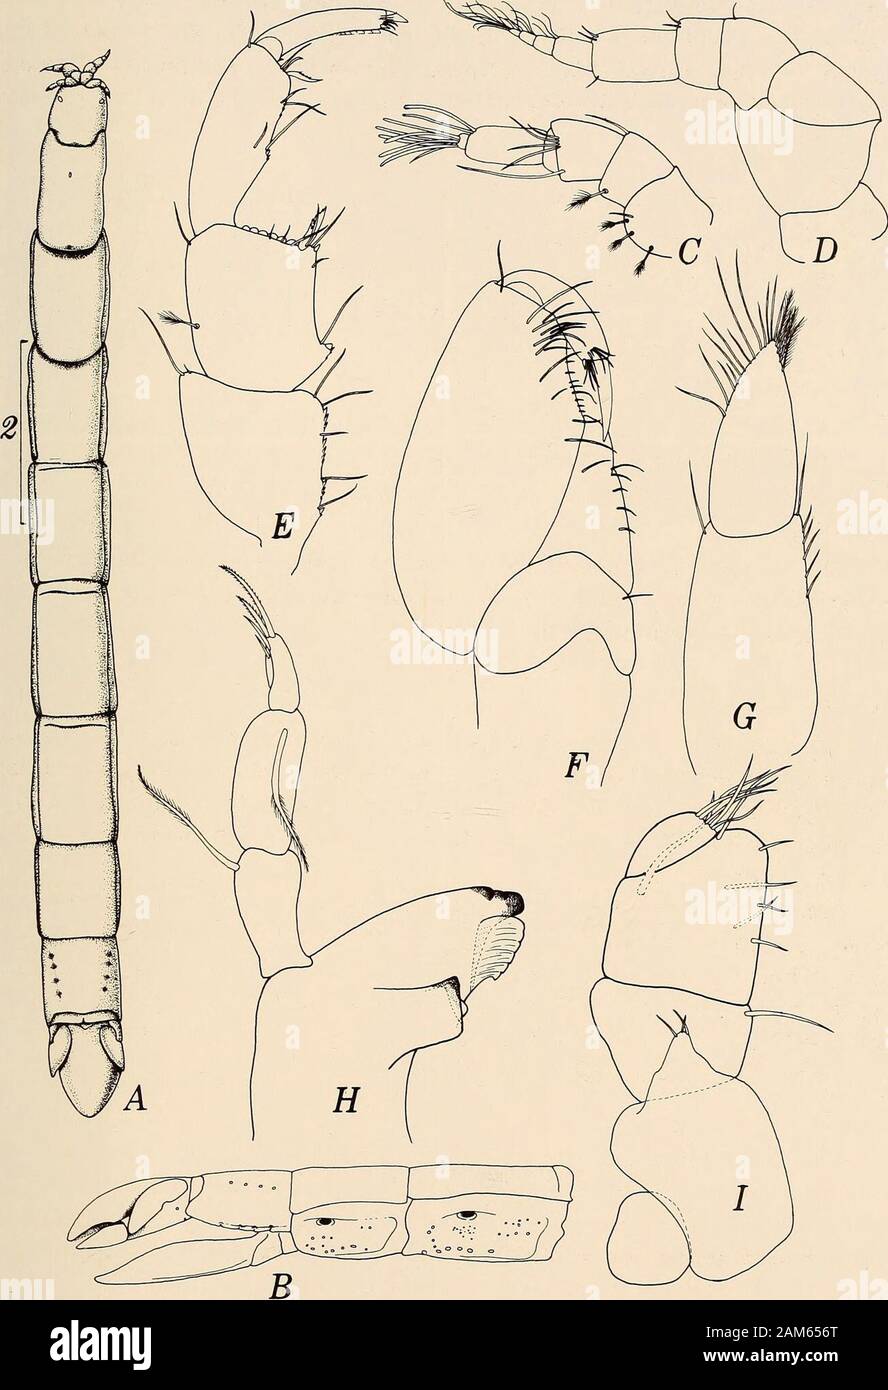 Annals of the South African Museum = Annale van die Suid-Afrikaanse Museum . species described here.The telson of M. foveolata, however, is obscurely tri-ridged, with pits betweenthe ridges, while M. schotteae and M. transkei have a single mid-dorsal ridgeand no pits on the telson. Malacanthura schotteae has a strongly notched uropodal exopod, aposteriorly constricted telson, and scaled lobes on the dactylus and propodalpalm, while M. transkei has an unnotched oval-lanceolate uropodal exopod,evenly convex telsonic margins, and lacks propodal and dactylar lobes inpereopod 1. Malacanthura transk Stock Photo